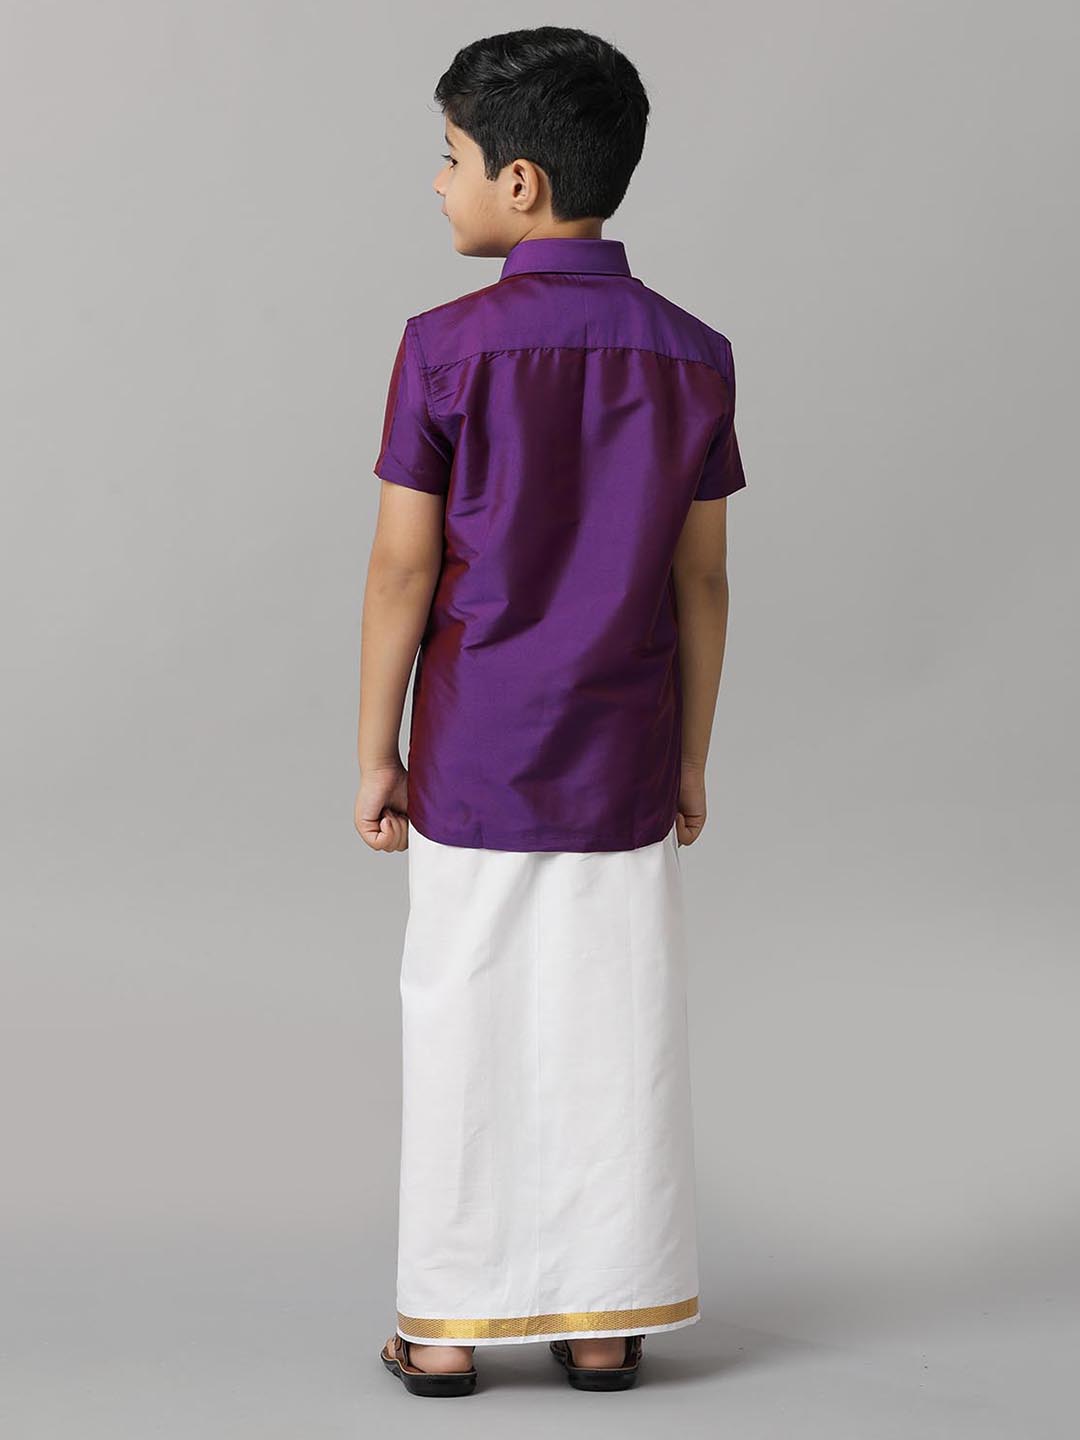 Boys Silk Cotton Violet Half Sleeves Shirt with Adjustable White Dhoti Combo K21-Back view